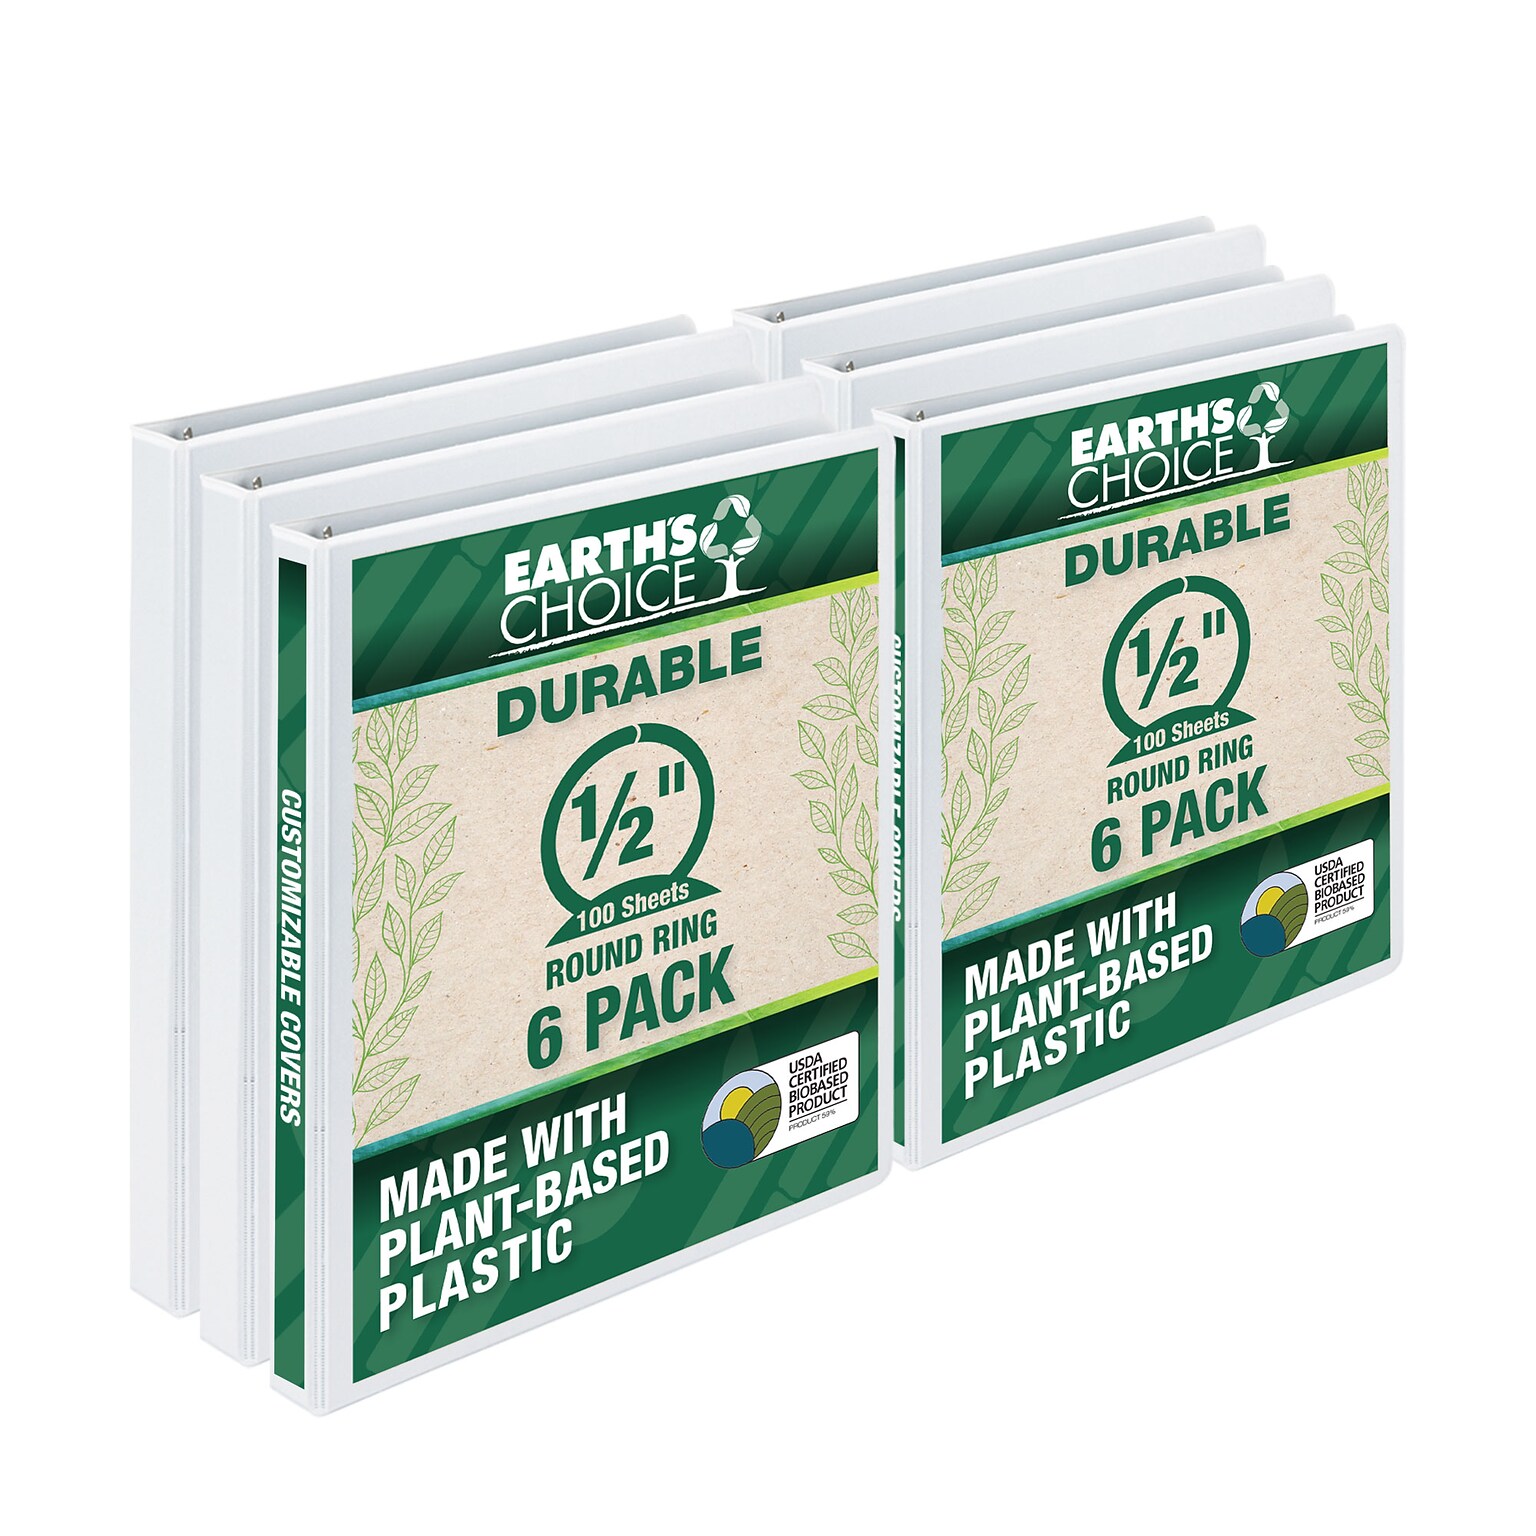 Samsill Earths Choice Biobased 1/2 3-Ring View Binders, White, 6/Pack (I08917)